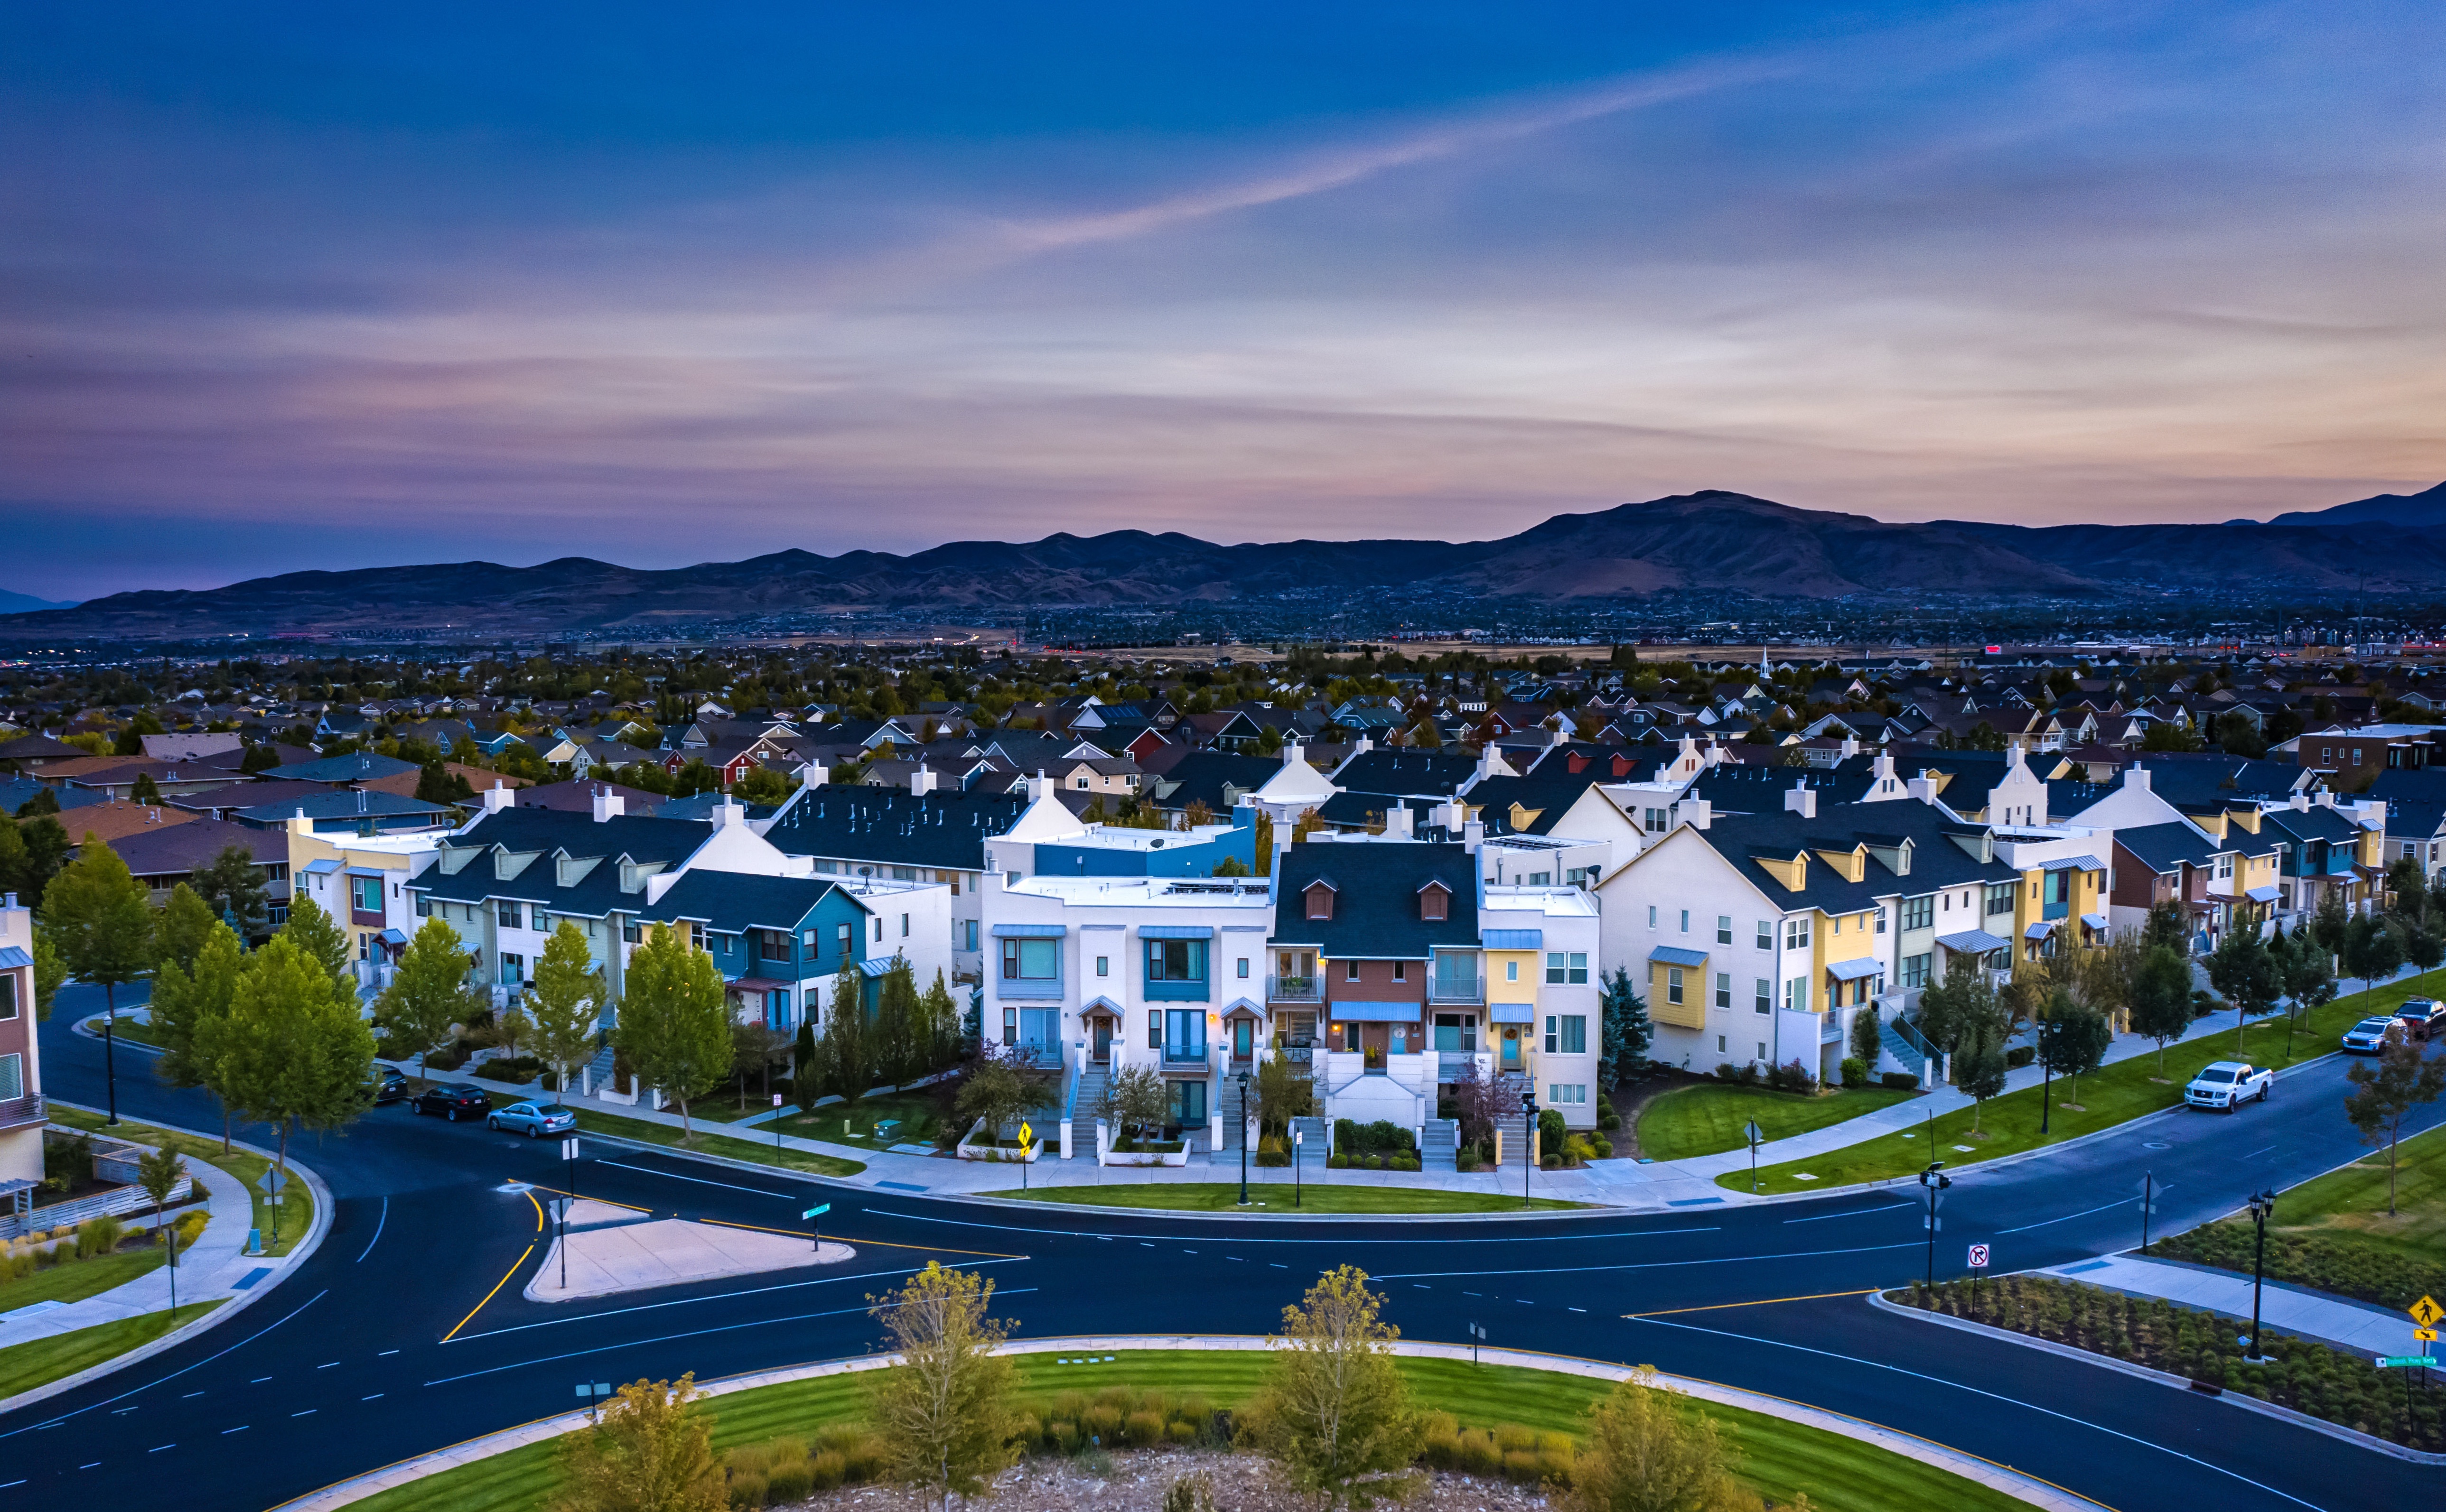 Colorful homes sprawled out in front the mountain lined skyline in South Jordan, Utah